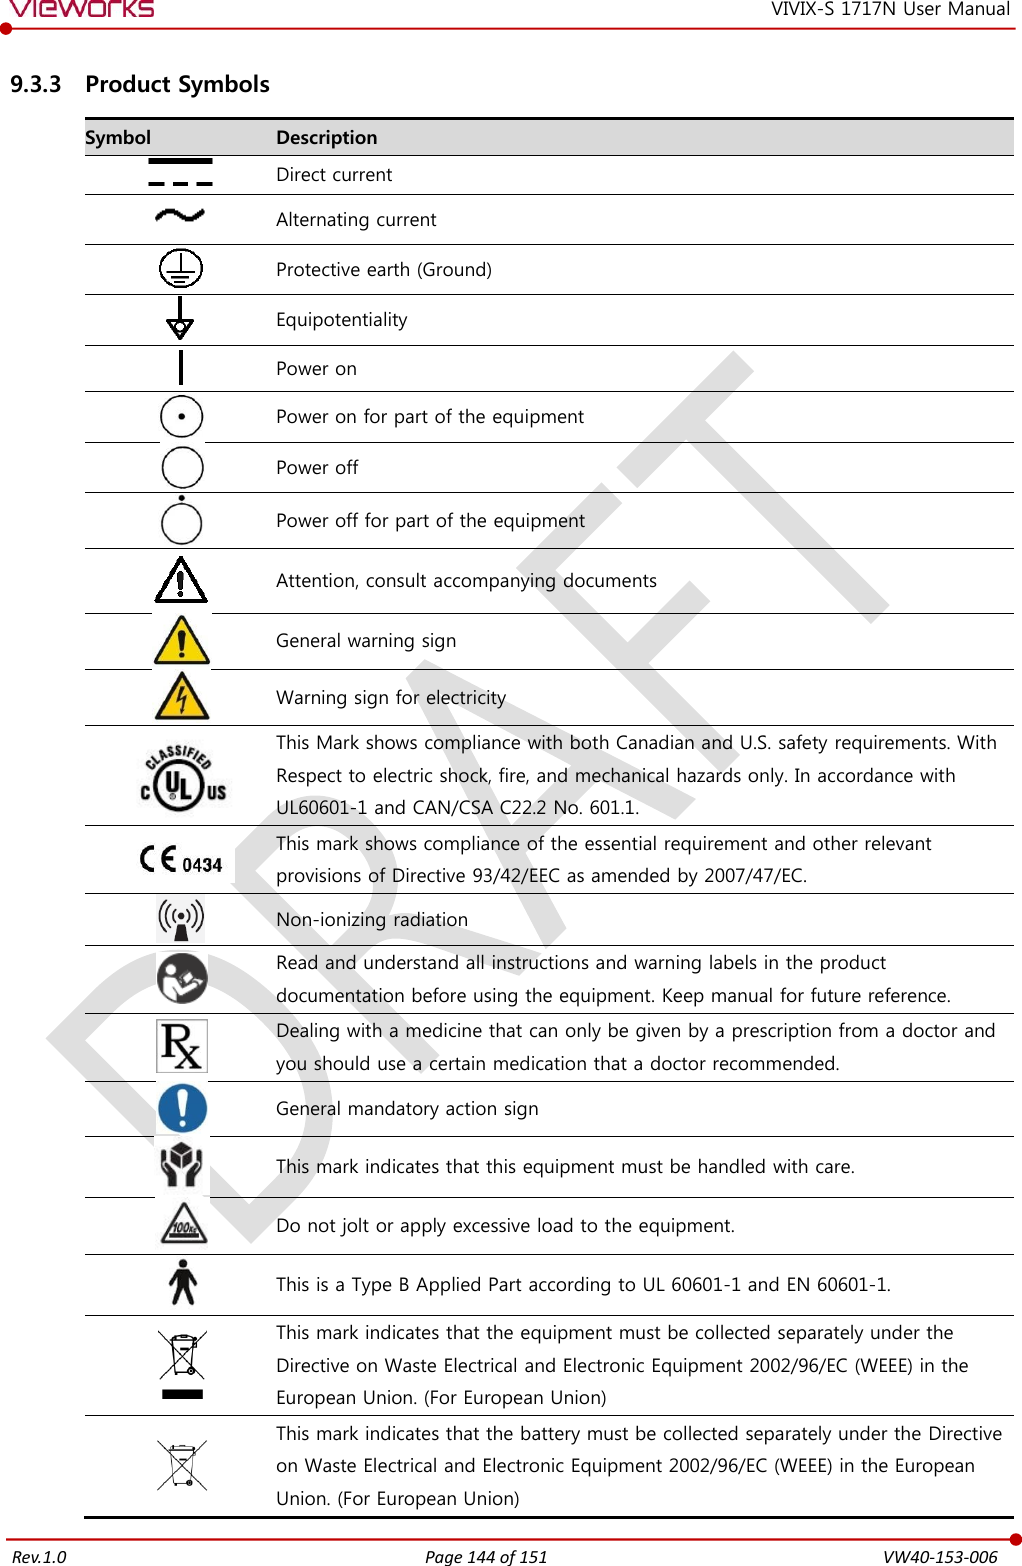   Rev.1.0 Page 144 of 151  VW40-153-006 VIVIX-S 1717N User Manual 9.3.3 Product Symbols Symbol Description  Direct current  Alternating current  Protective earth (Ground)  Equipotentiality  Power on  Power on for part of the equipment  Power off  Power off for part of the equipment  Attention, consult accompanying documents  General warning sign  Warning sign for electricity  This Mark shows compliance with both Canadian and U.S. safety requirements. With Respect to electric shock, fire, and mechanical hazards only. In accordance with UL60601-1 and CAN/CSA C22.2 No. 601.1.  This mark shows compliance of the essential requirement and other relevant provisions of Directive 93/42/EEC as amended by 2007/47/EC.  Non-ionizing radiation  Read and understand all instructions and warning labels in the product documentation before using the equipment. Keep manual for future reference.  Dealing with a medicine that can only be given by a prescription from a doctor and you should use a certain medication that a doctor recommended.  General mandatory action sign  This mark indicates that this equipment must be handled with care.  Do not jolt or apply excessive load to the equipment.  This is a Type B Applied Part according to UL 60601-1 and EN 60601-1.  This mark indicates that the equipment must be collected separately under the Directive on Waste Electrical and Electronic Equipment 2002/96/EC (WEEE) in the European Union. (For European Union)  This mark indicates that the battery must be collected separately under the Directive on Waste Electrical and Electronic Equipment 2002/96/EC (WEEE) in the European Union. (For European Union) 